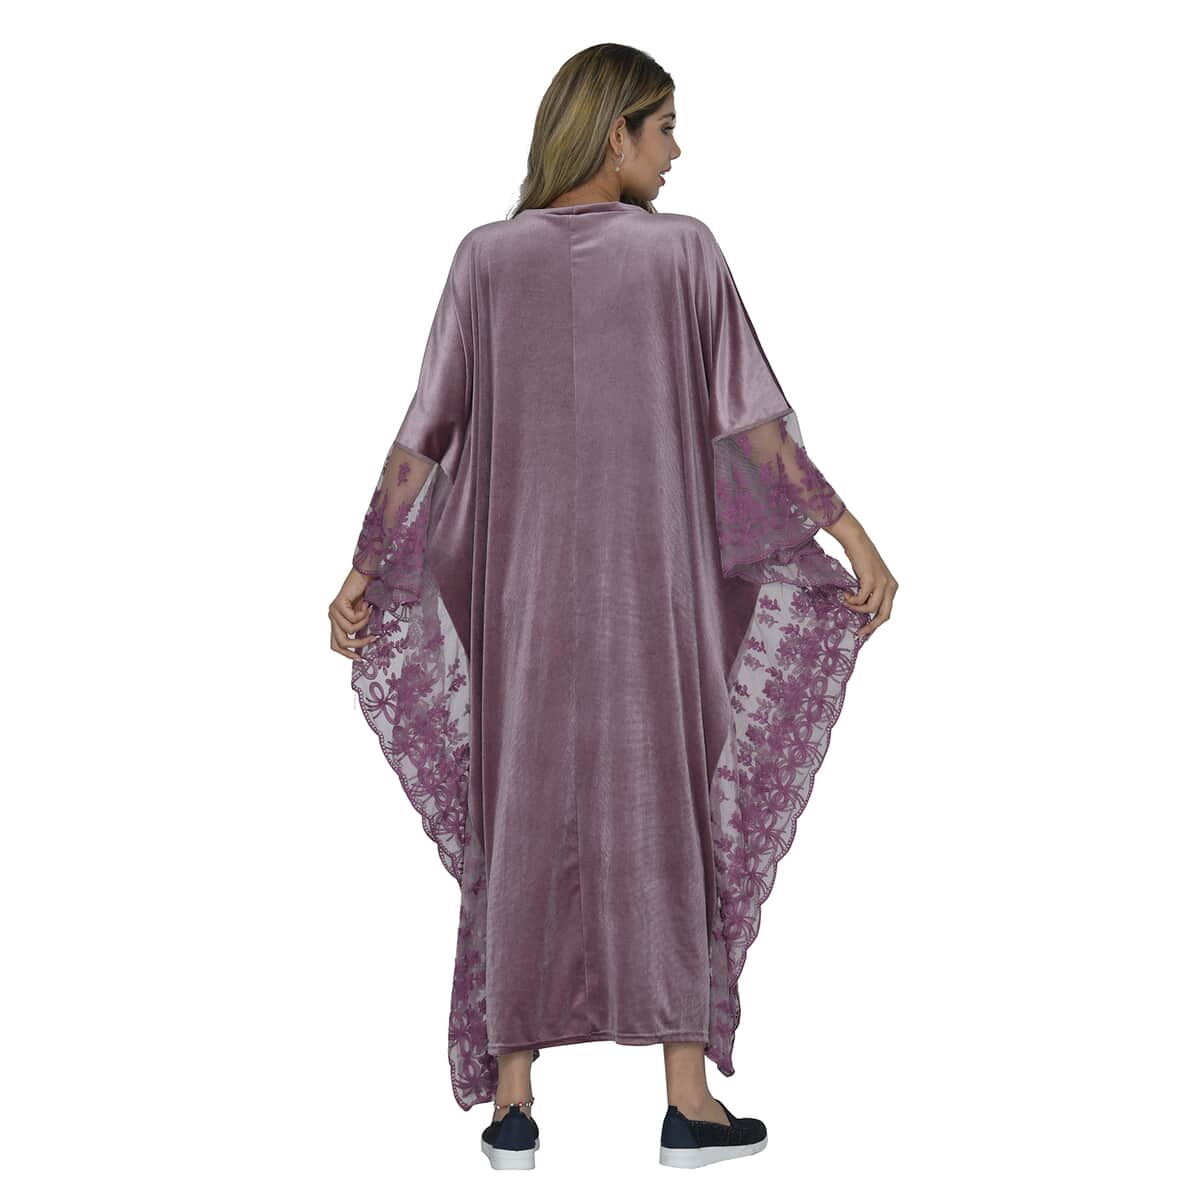 Tamsy Black Label - Lux Stretch Velvet Kaftan with Lace in Vintage Rose - One Size Fits Most image number 1